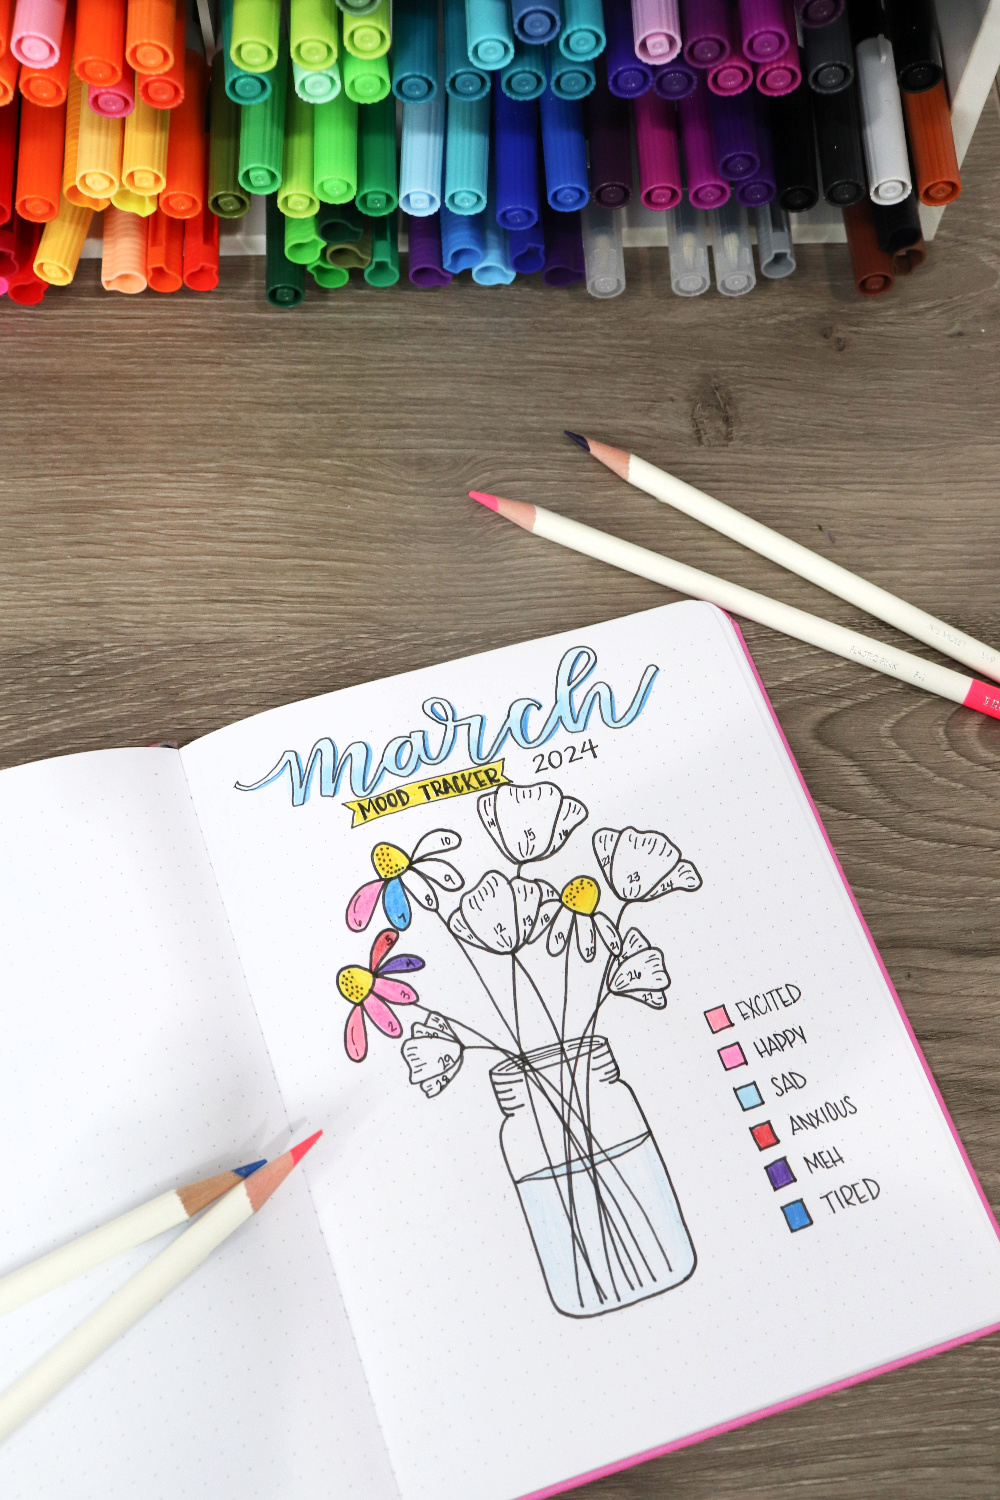 Image contains an open journal with a hand drawn flower bouquet mood tracker page. Four colored pencils sit nearby, and an organizer filled with multicolored markers is in the background on a wooden desktop.